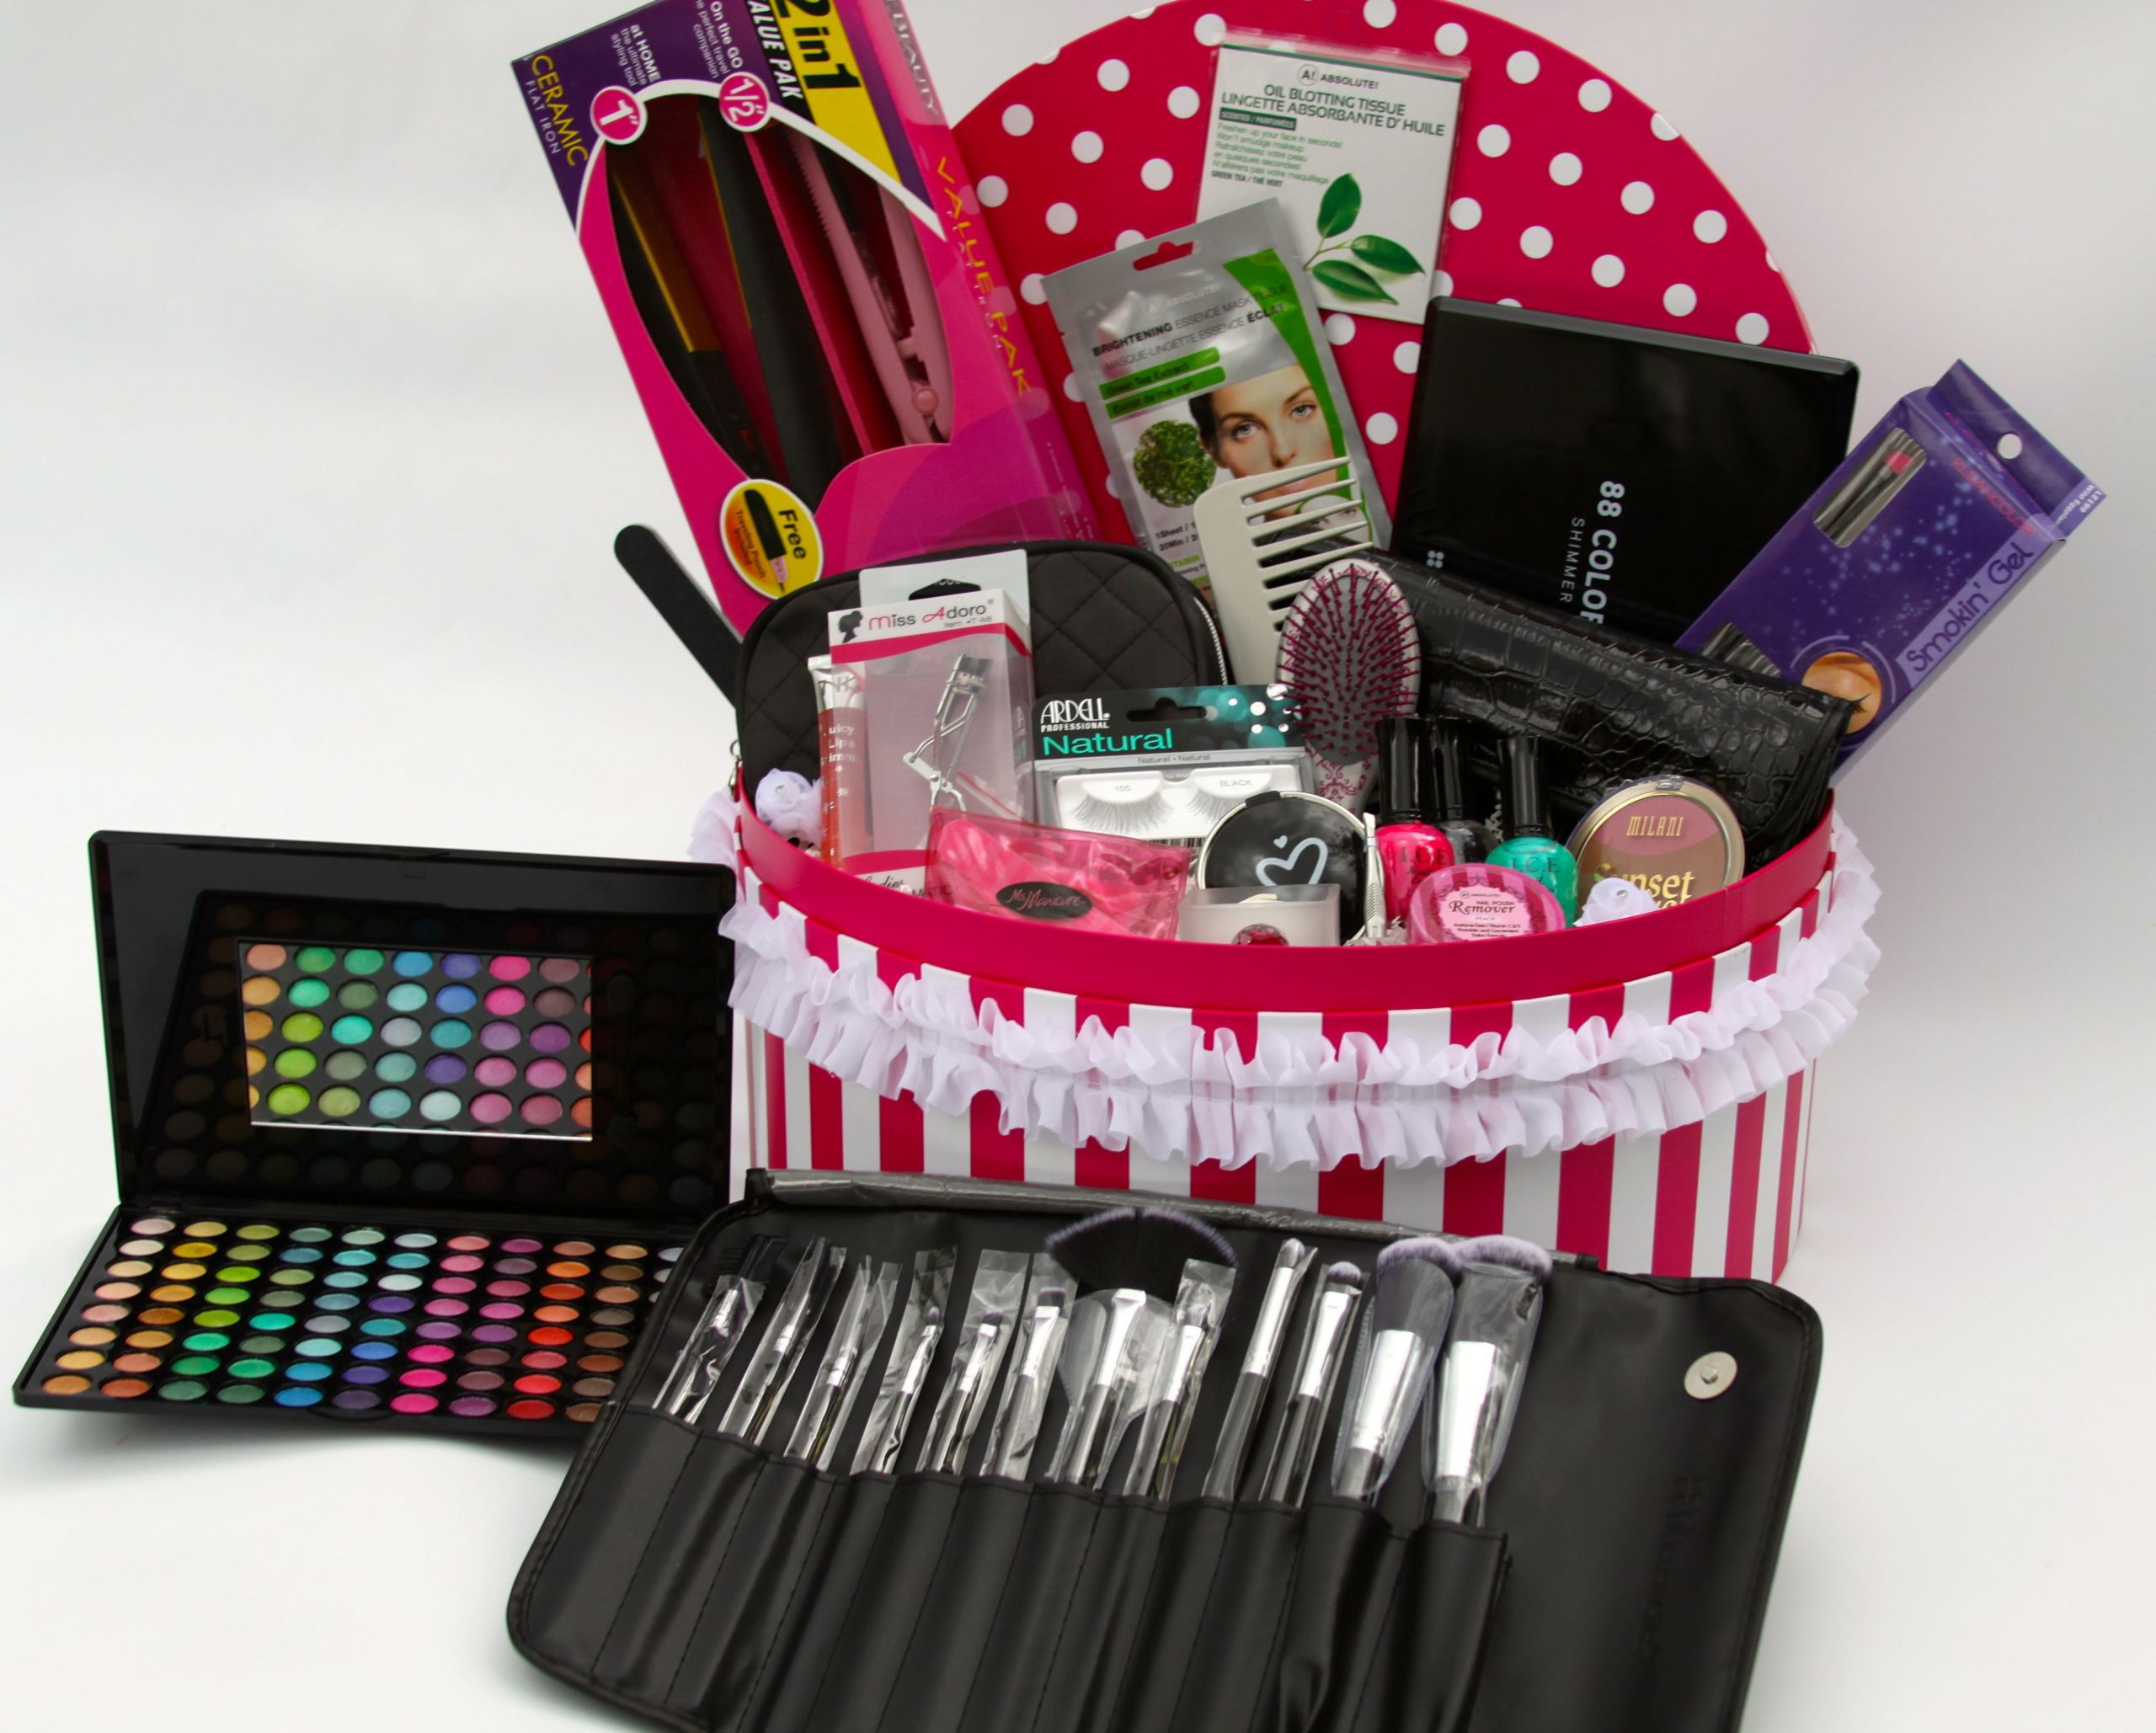 Makeup Gift Basket Ideas
 This t basket is full of awesome beauty and makeup